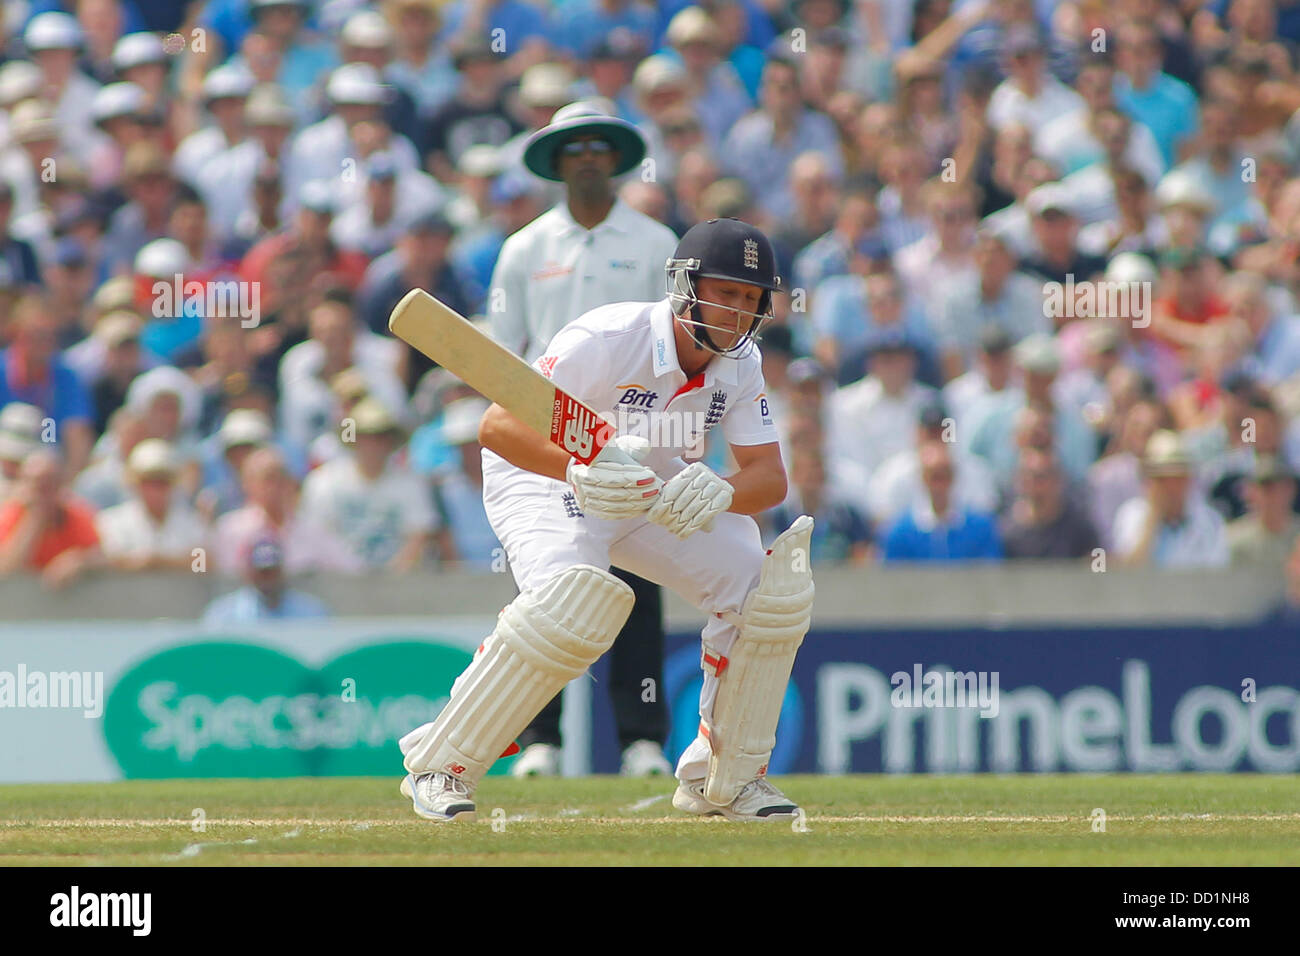 London, UK. 23rd Aug, 2013. Jonathan Trott ducks under a bouncer during day three of the 5th Investec Ashes cricket match between England and Australia played at The Kia Oval Cricket Ground on August 23, 2013 in London, England. Credit:  Mitchell Gunn/ESPA/Alamy Live News Stock Photo